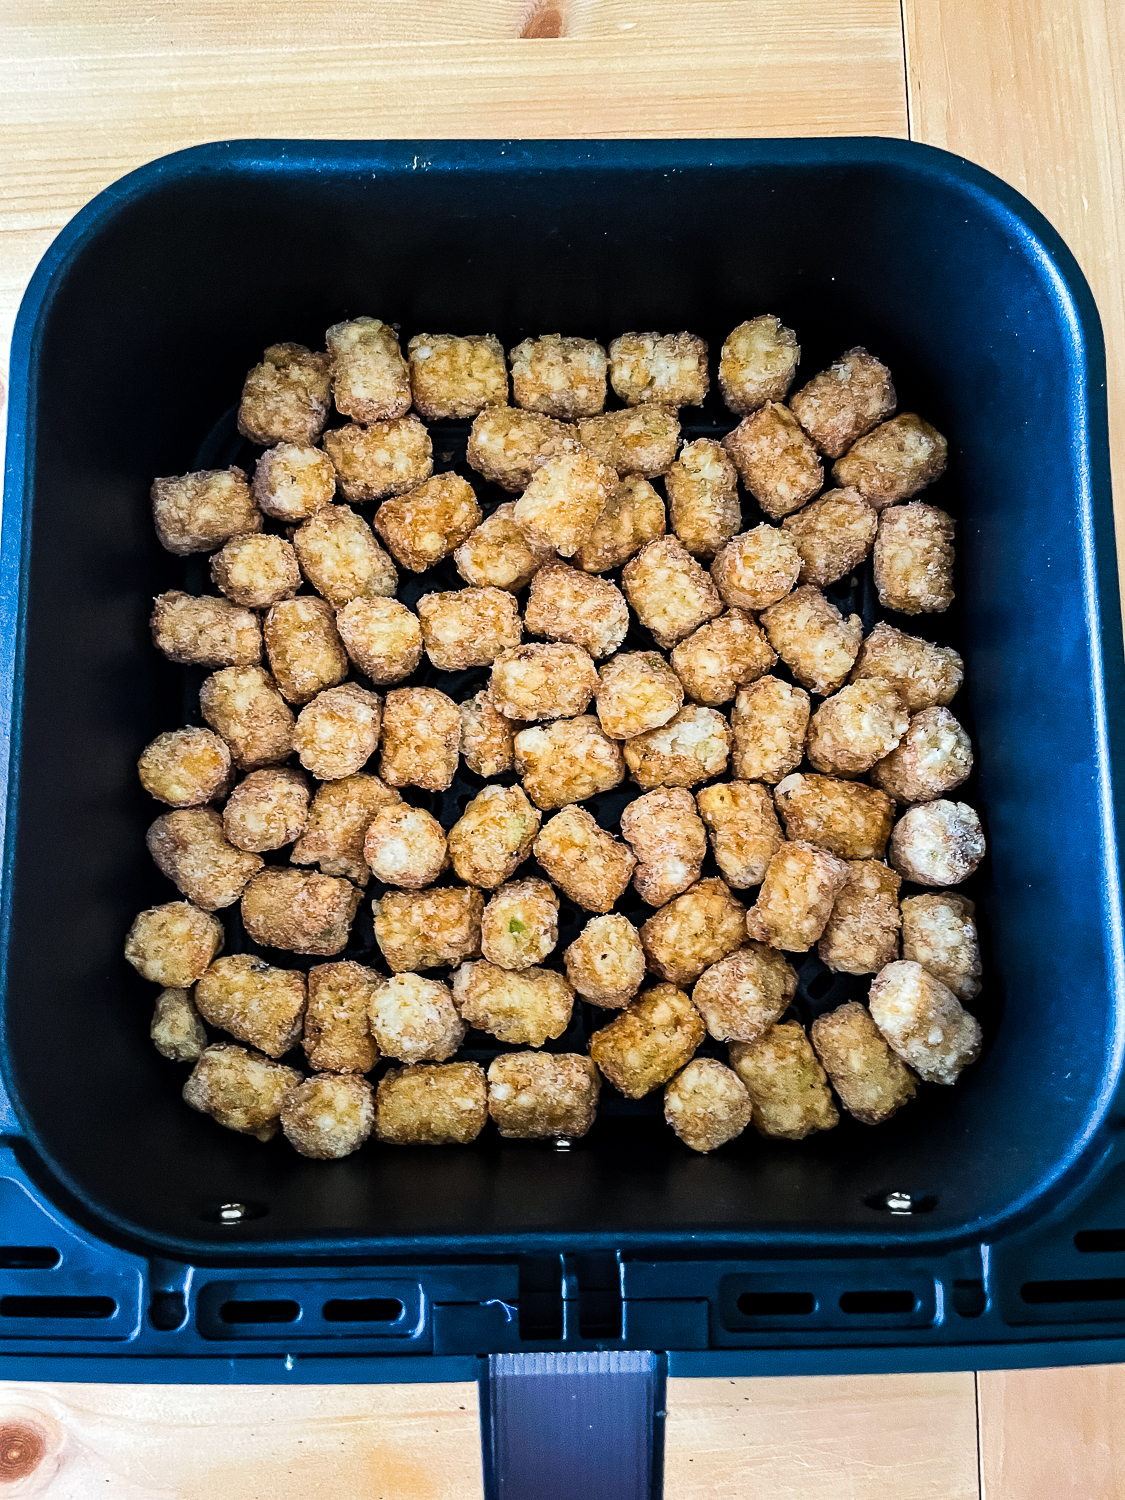 Overhead view of Frozen Ore-Ida Tater Tots Potato Puffs in a single layer in the basket of a Cosori air fryer